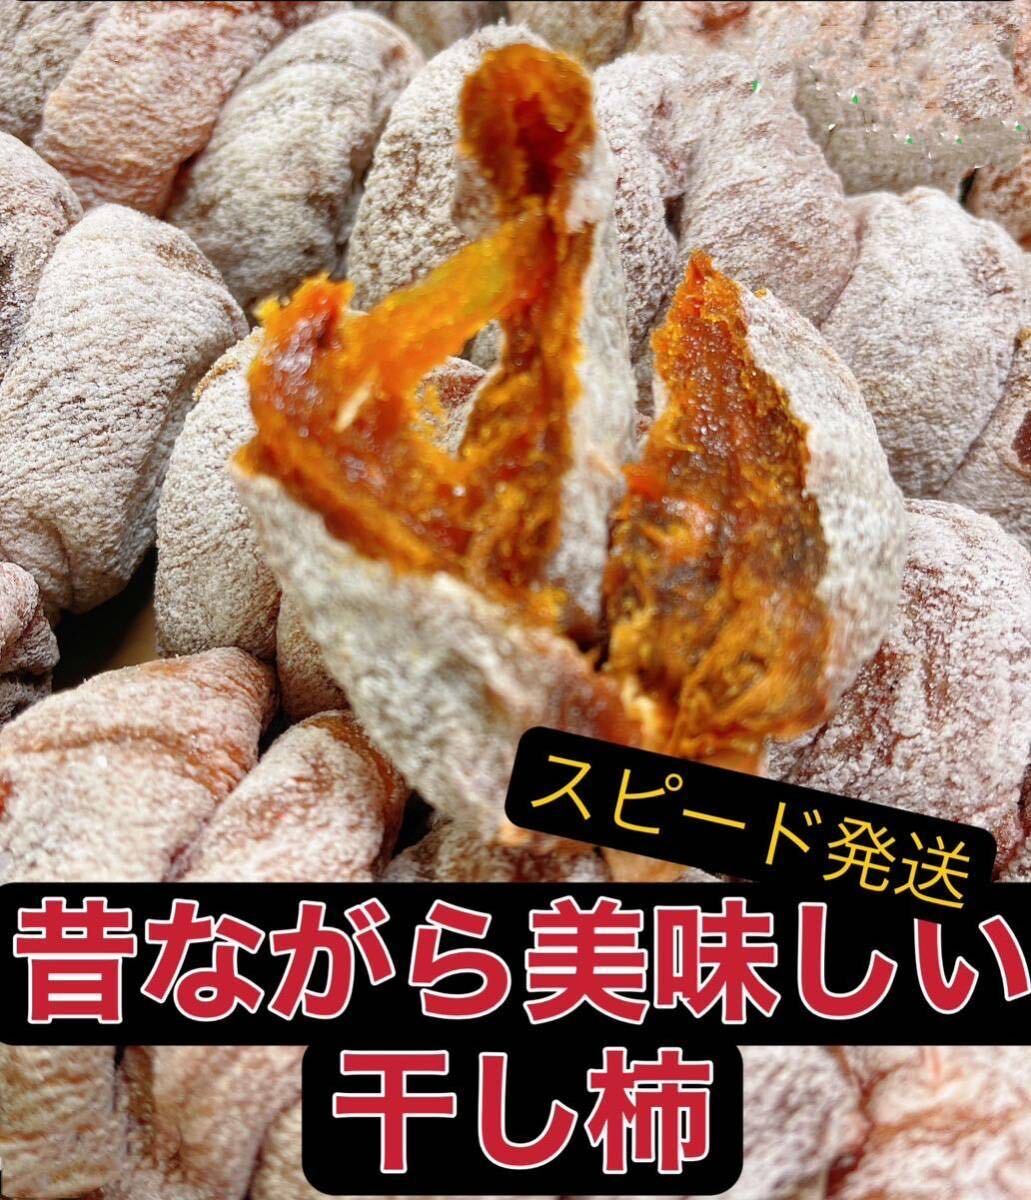  former times while. dried persimmon persimmon dried persimmon missed taste ~ box included 1kg.